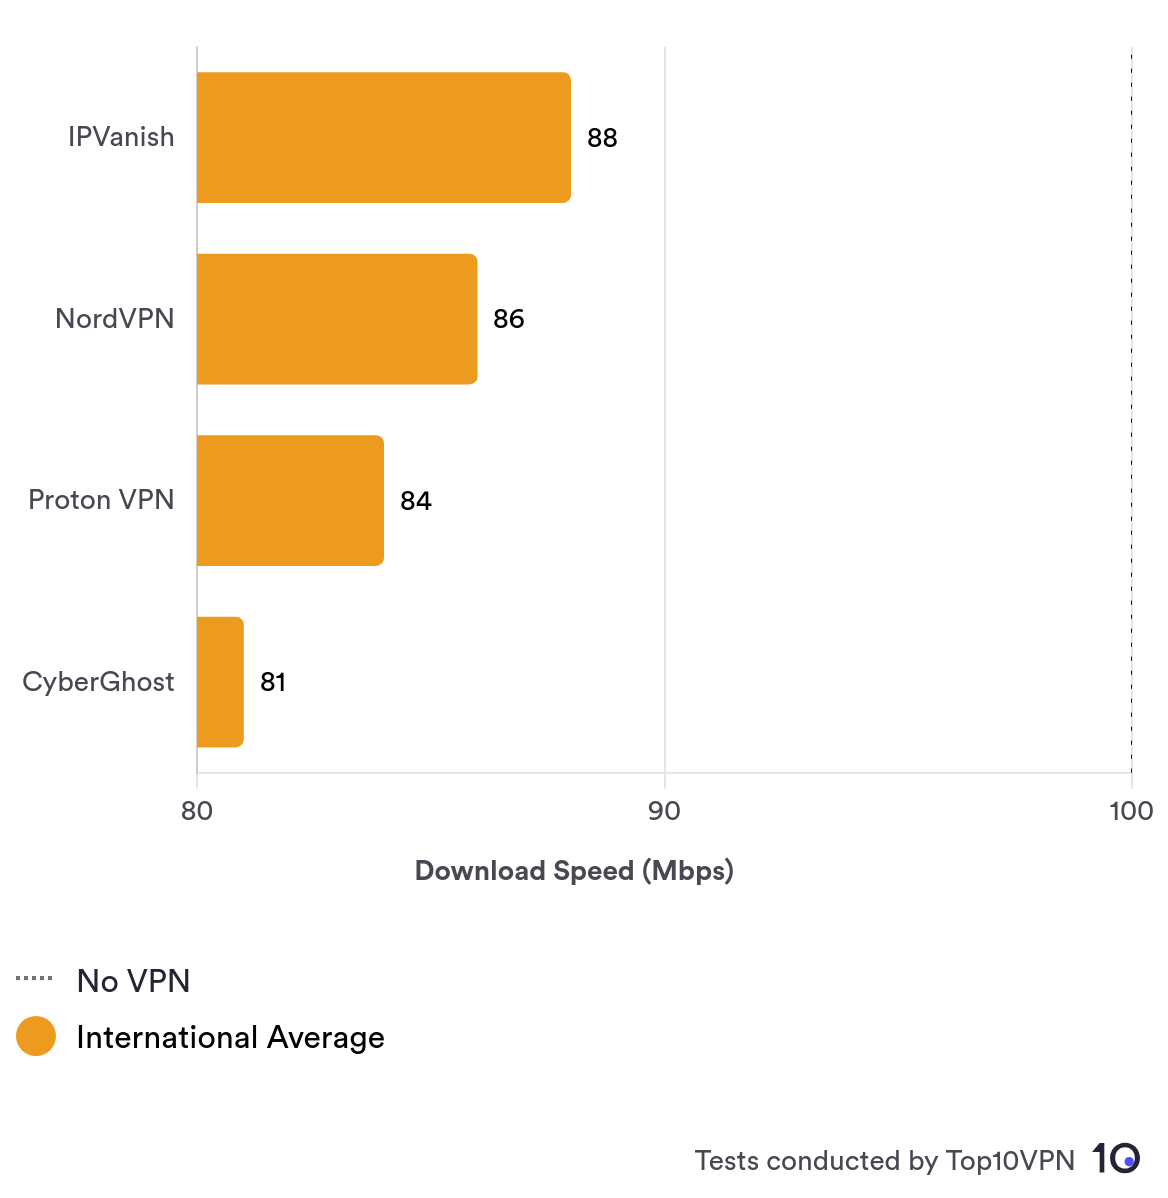 Comparison bar chart showing IPVanish's average international speed performance against other top VPN services.